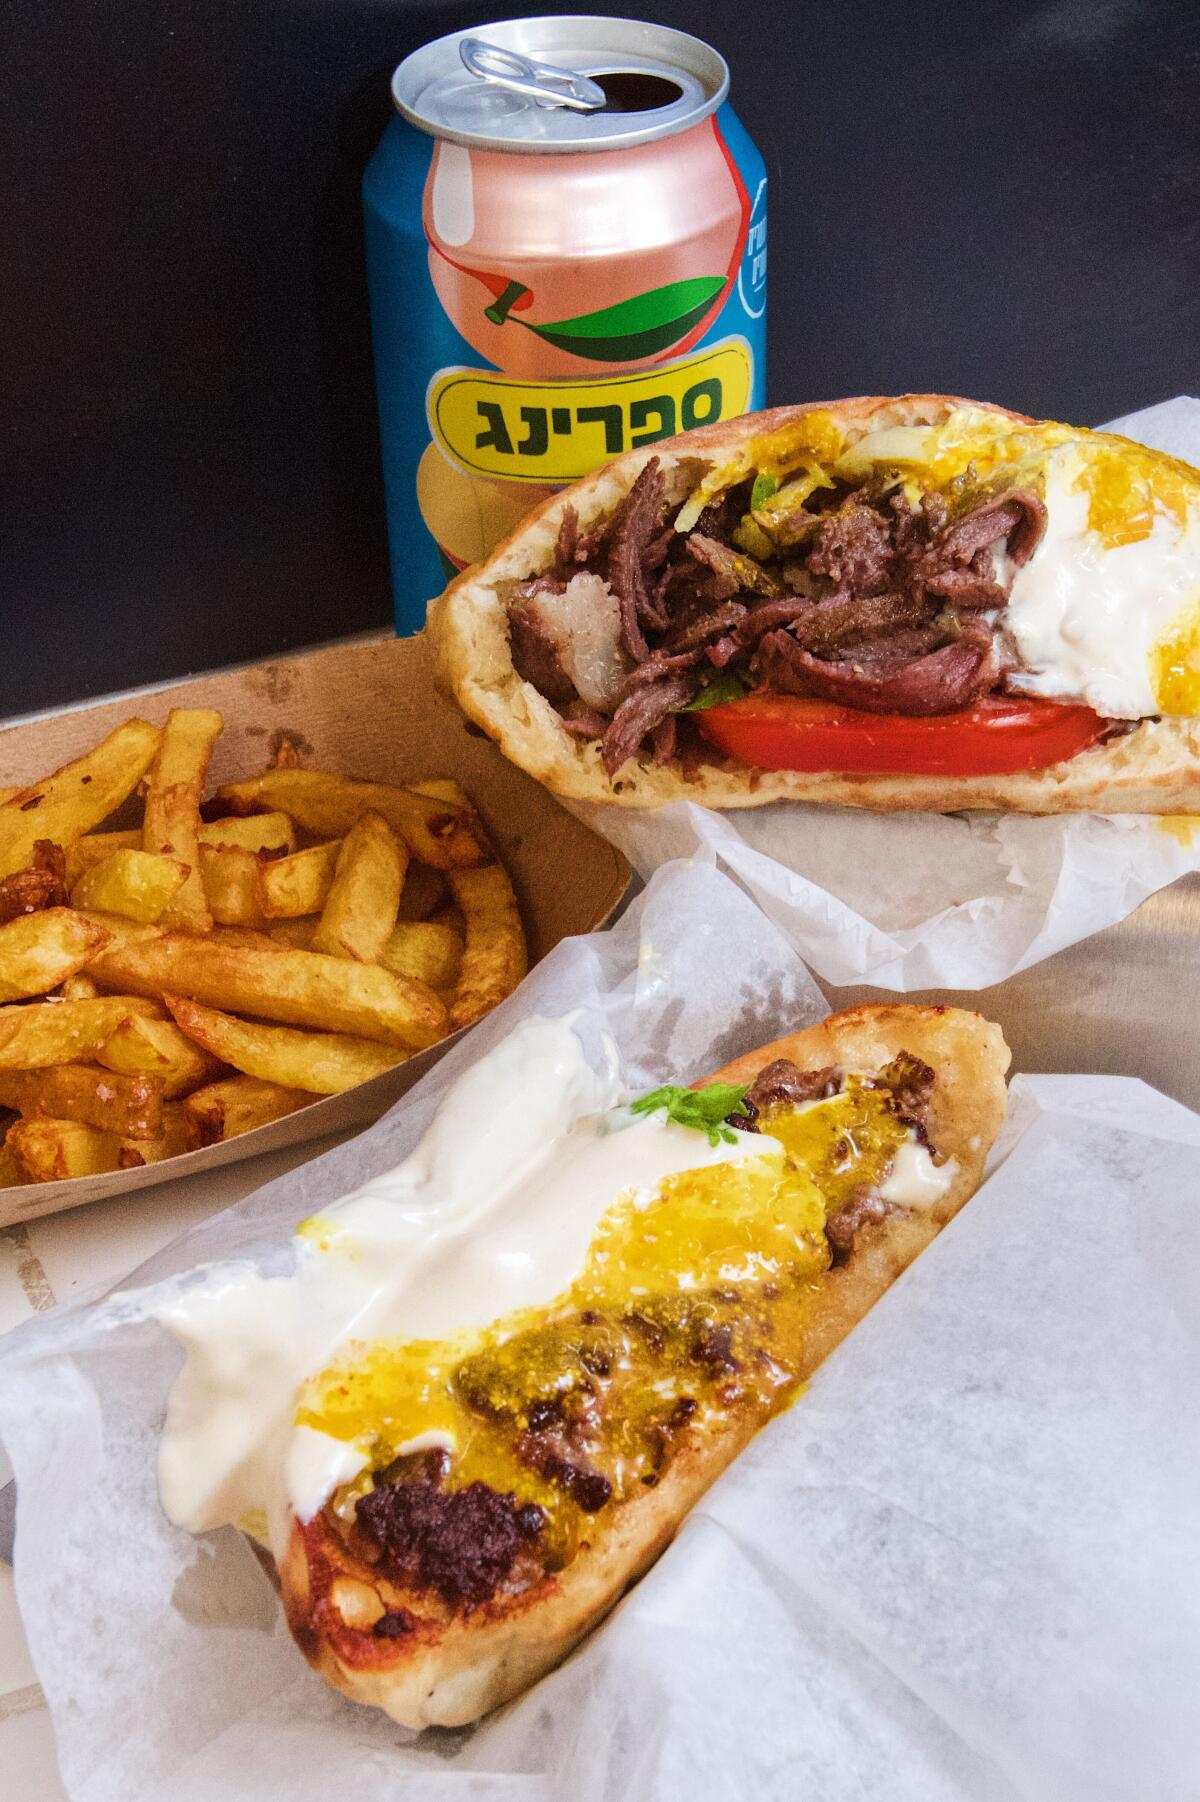 A wagyu shawarma, arayes, side of French fries and a can of Israeli juice.